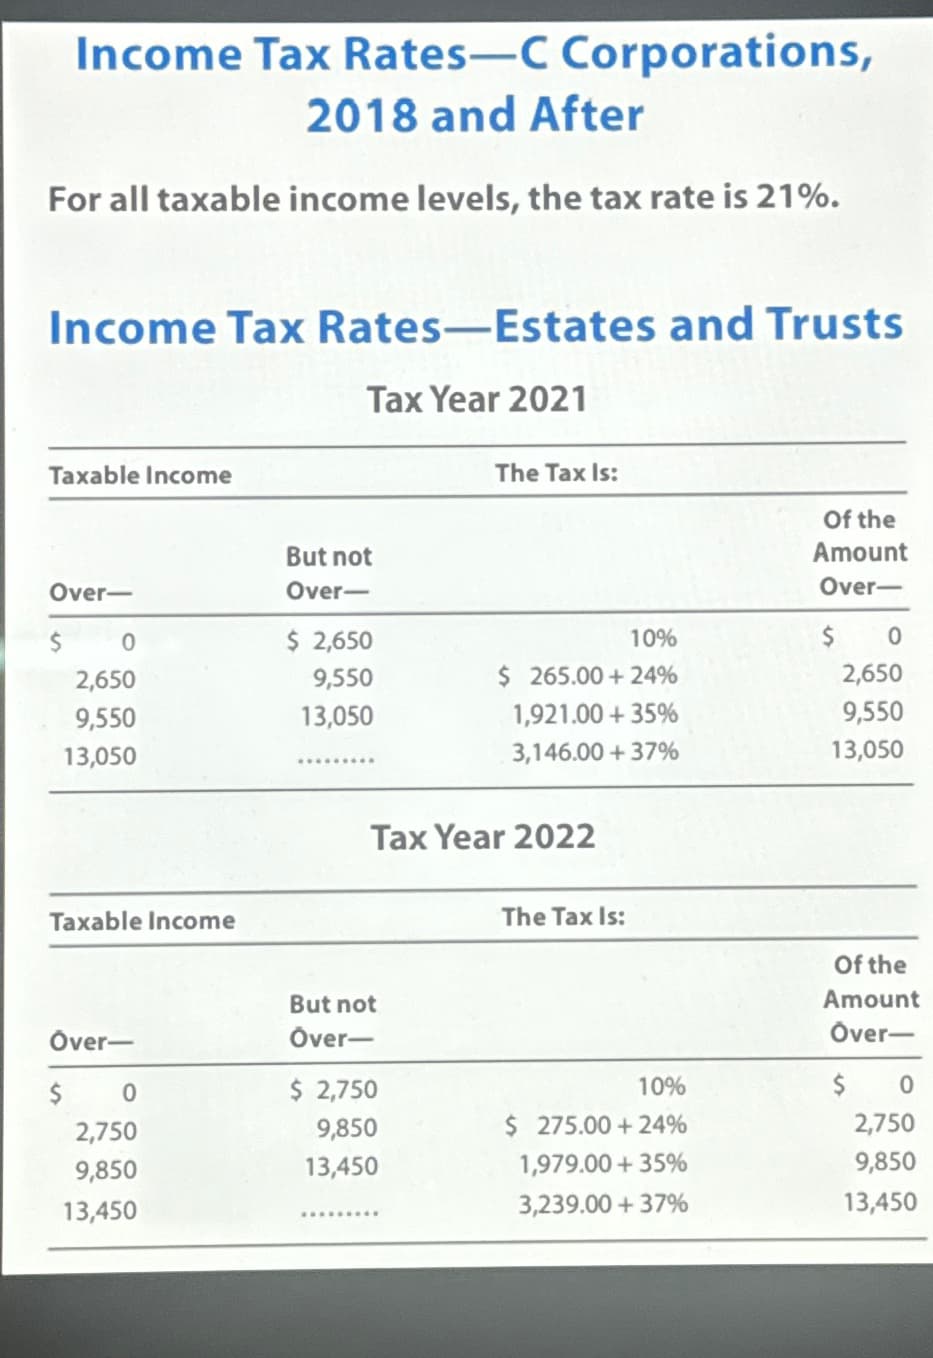 Income Tax Rates-C Corporations,
2018 and After
For all taxable income levels, the tax rate is 21%.
Income Tax Rates-Estates and Trusts
Tax Year 2021
Taxable Income
Over-
But not
Over-
The Tax Is:
Of the
Amount
Over-
$
0
$ 2,650
10%
$ 0
2,650
9,550
9,550
13,050
$ 265.00+24%
2,650
1,921.00+35%
9,550
13,050
3,146.00+37%
13,050
Tax Year 2022
Taxable Income
Over-
$ 0
2,750
9,850
13,450
But not
Over-
$ 2,750
9,850
13,450
The Tax Is:
Of the
Amount
Over-
10%
$ 0
$ 275.00+24%
2,750
1,979.00+35%
9,850
3,239.00+37%
13,450